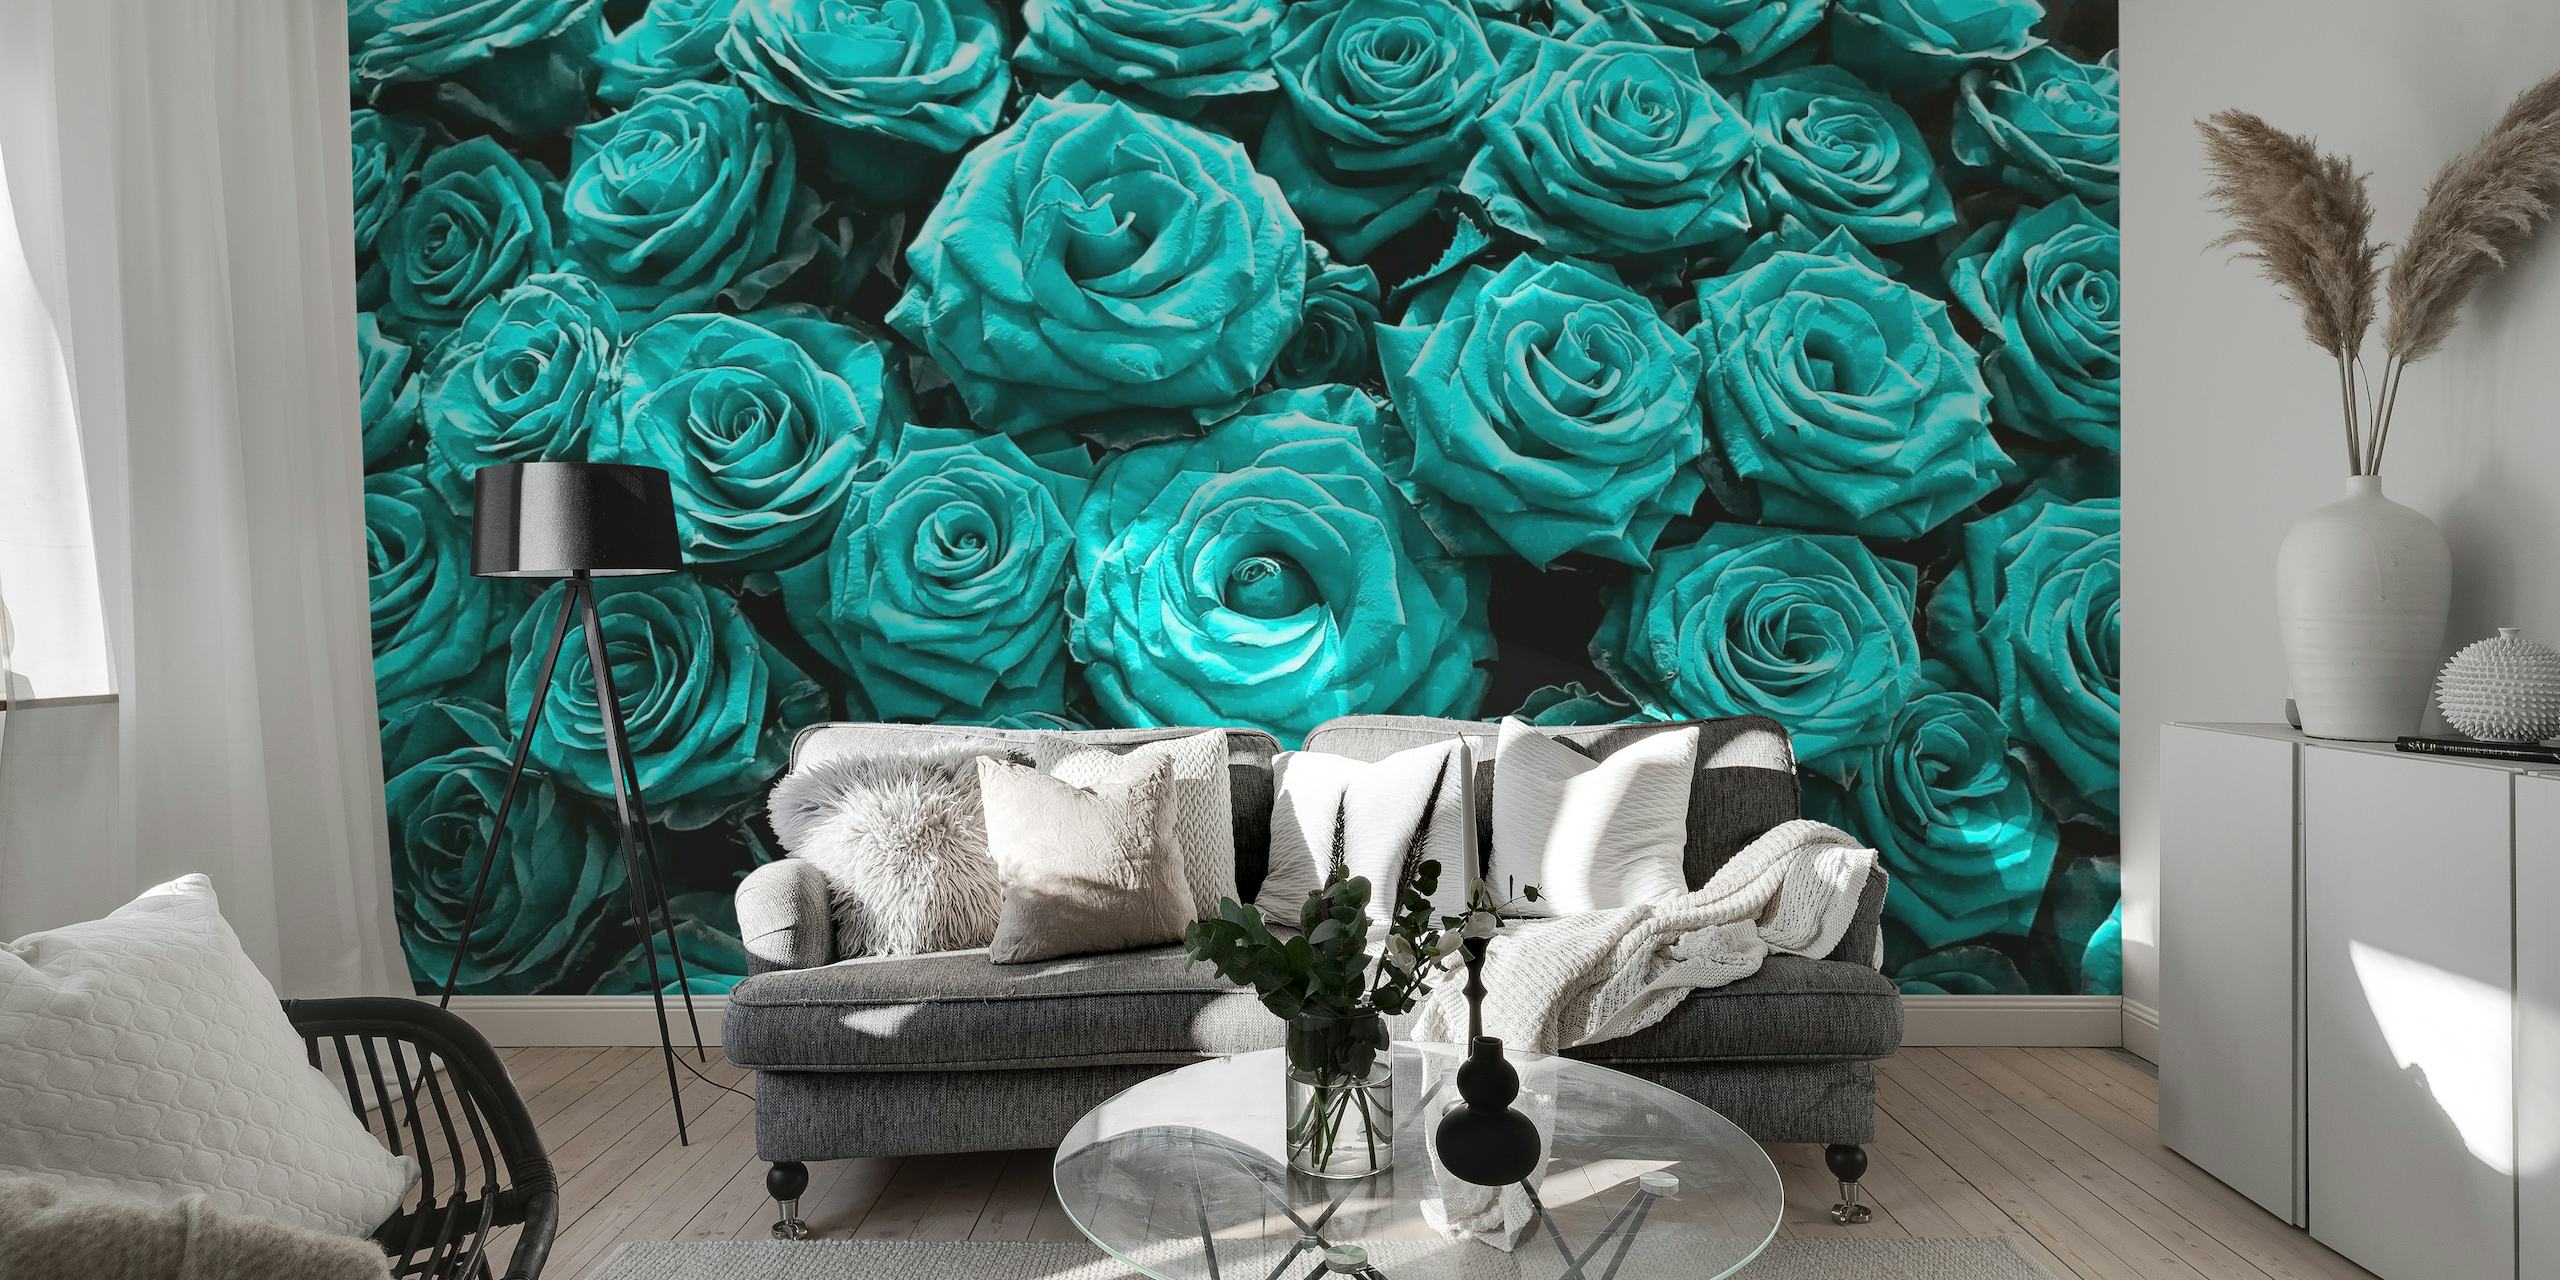 Large Teal Roses ταπετσαρία